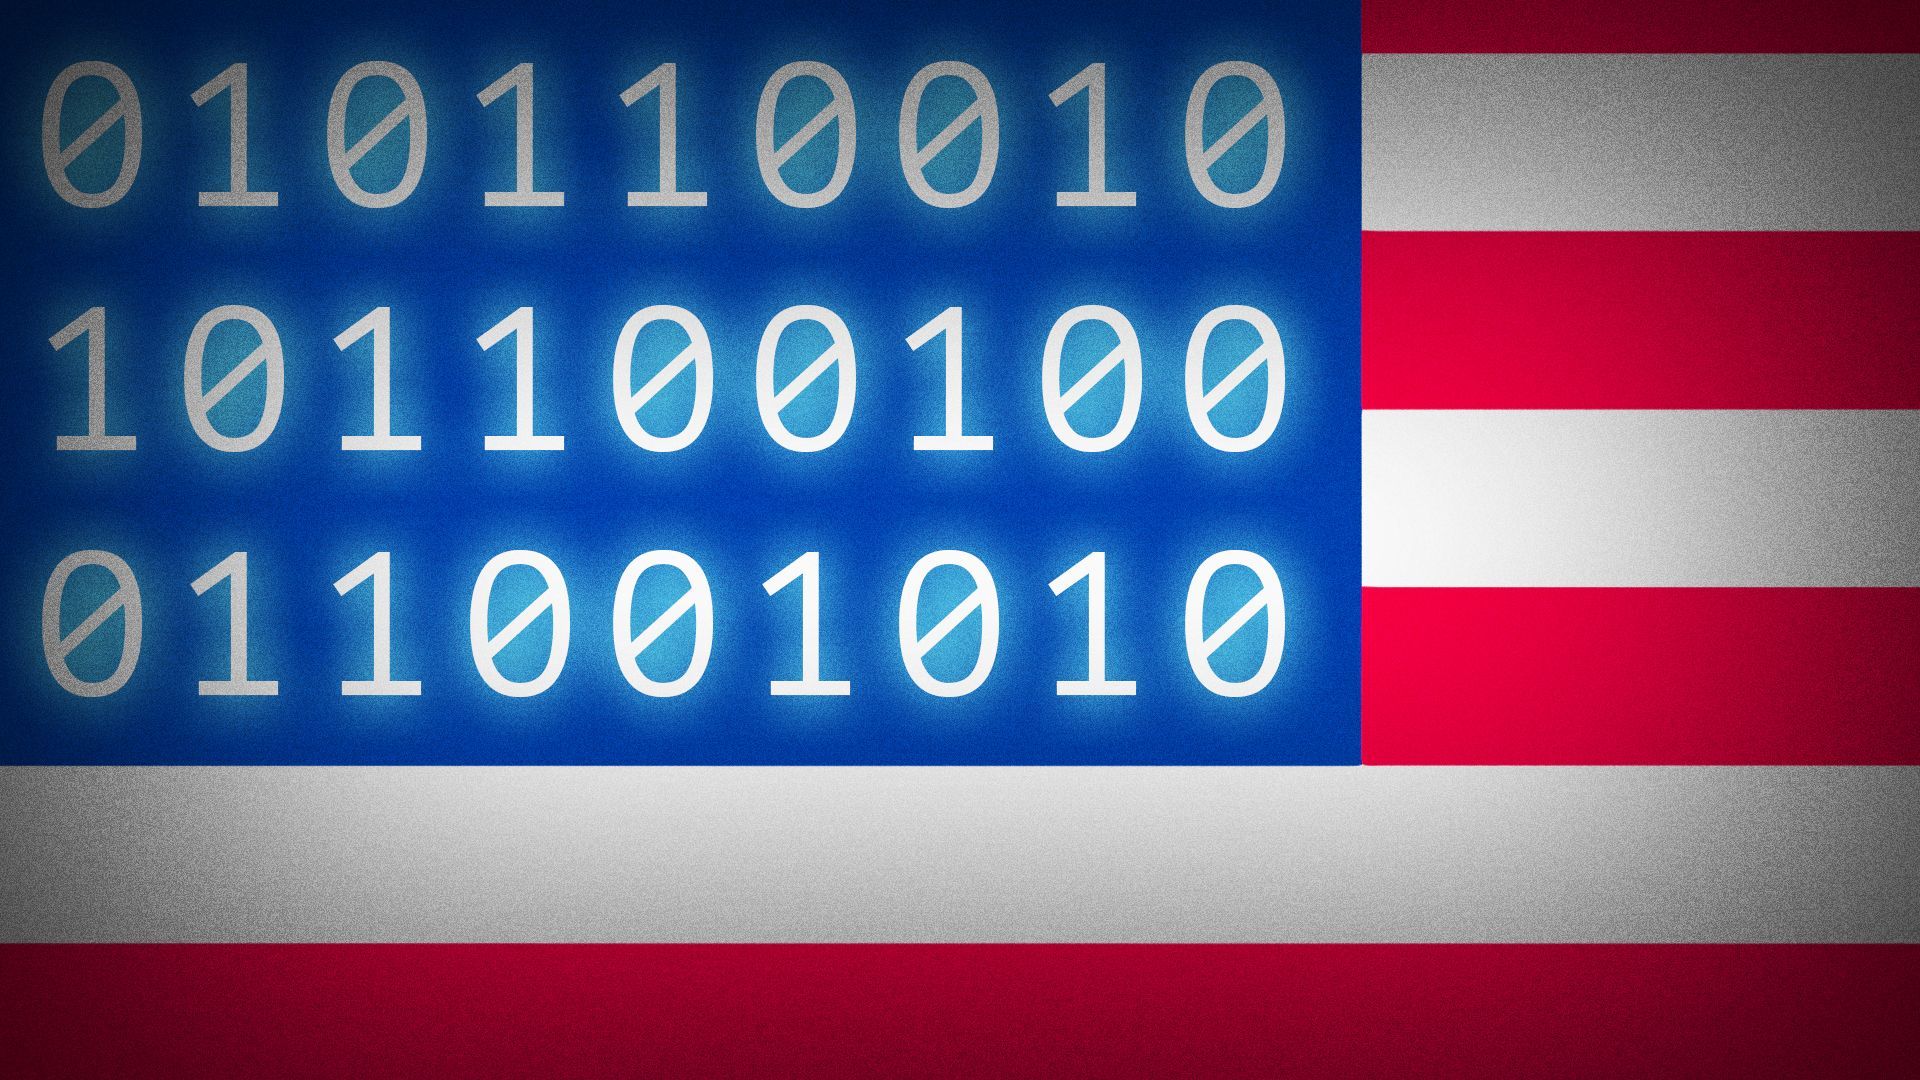 Illustration of a US flag, but the starts are replaced with binary numbers.